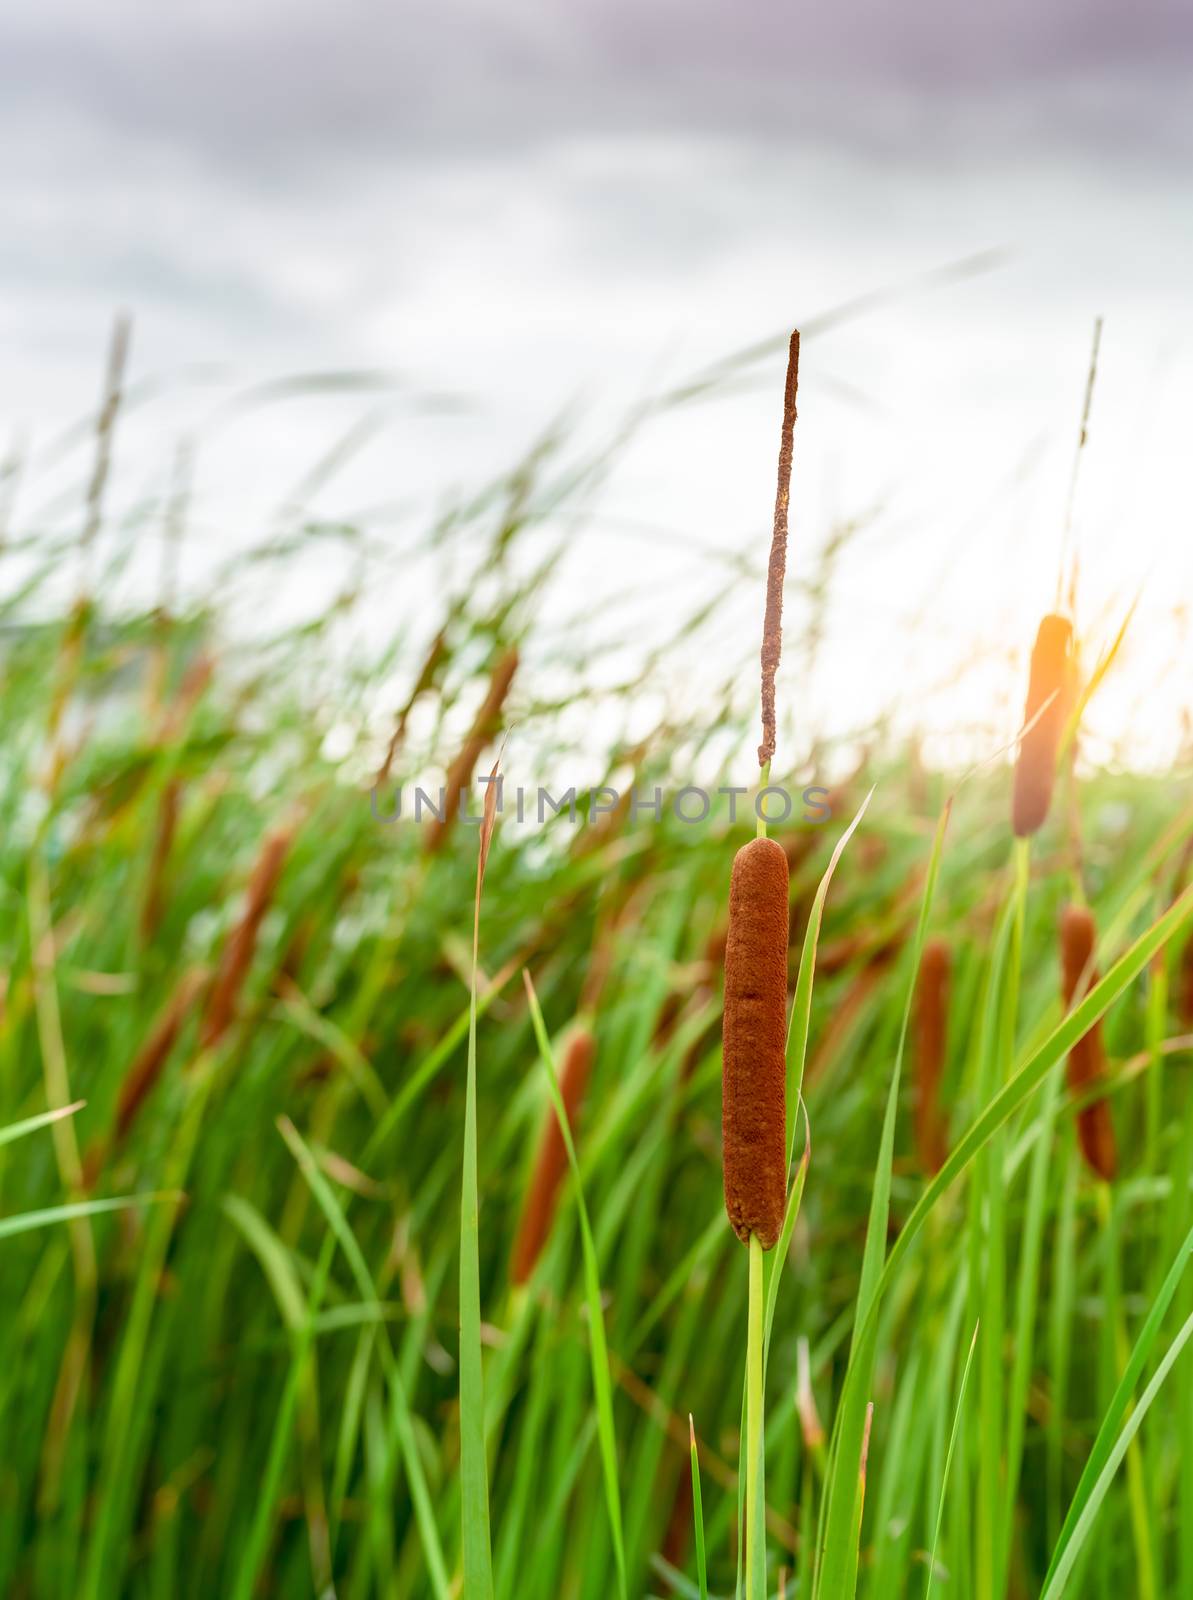 Brown grass flower with green leaves. Grass flower field with morning sunlight. Typha angustifolia field. Cattails on blurred grass field. The stalks are topped with brown, fluffy, sausage-shaped.